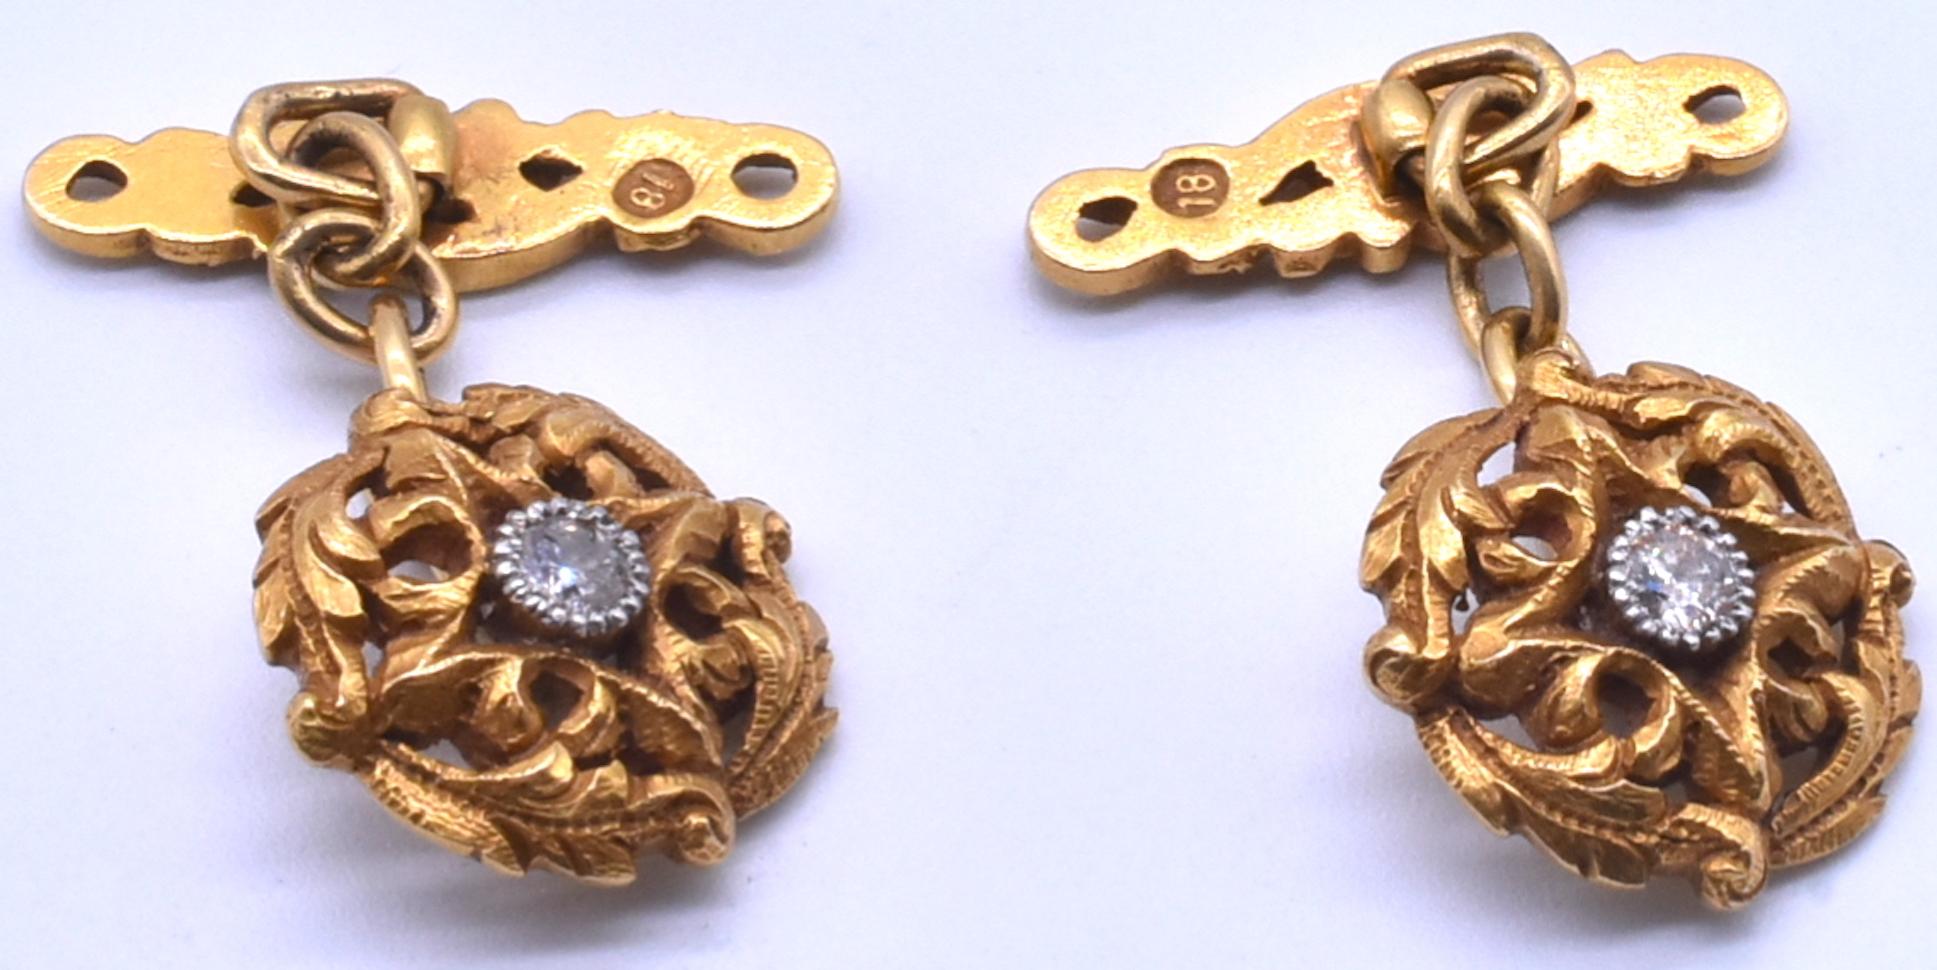 Antique Art Nouveau 18K Gold and Diamond Cufflinks c1900, a great gift for that special French Cuff Guy.